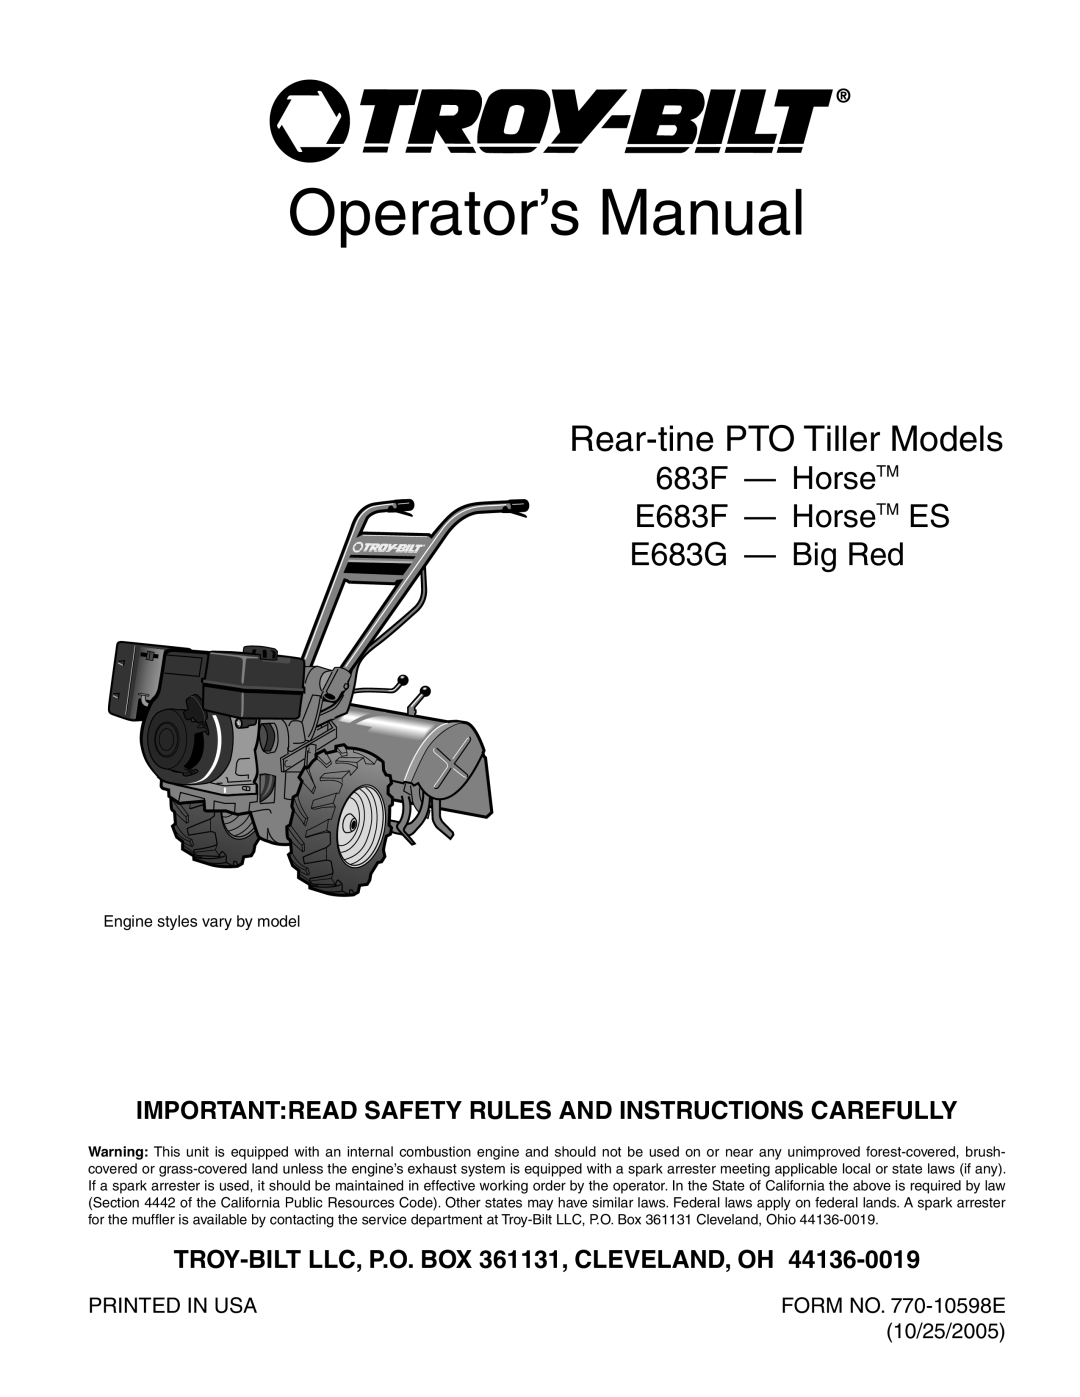 Troy-Bilt E683F, E683G manual Importantread Safety Rules And Instructions Carefully, Operator’s Manual, Printed In Usa 